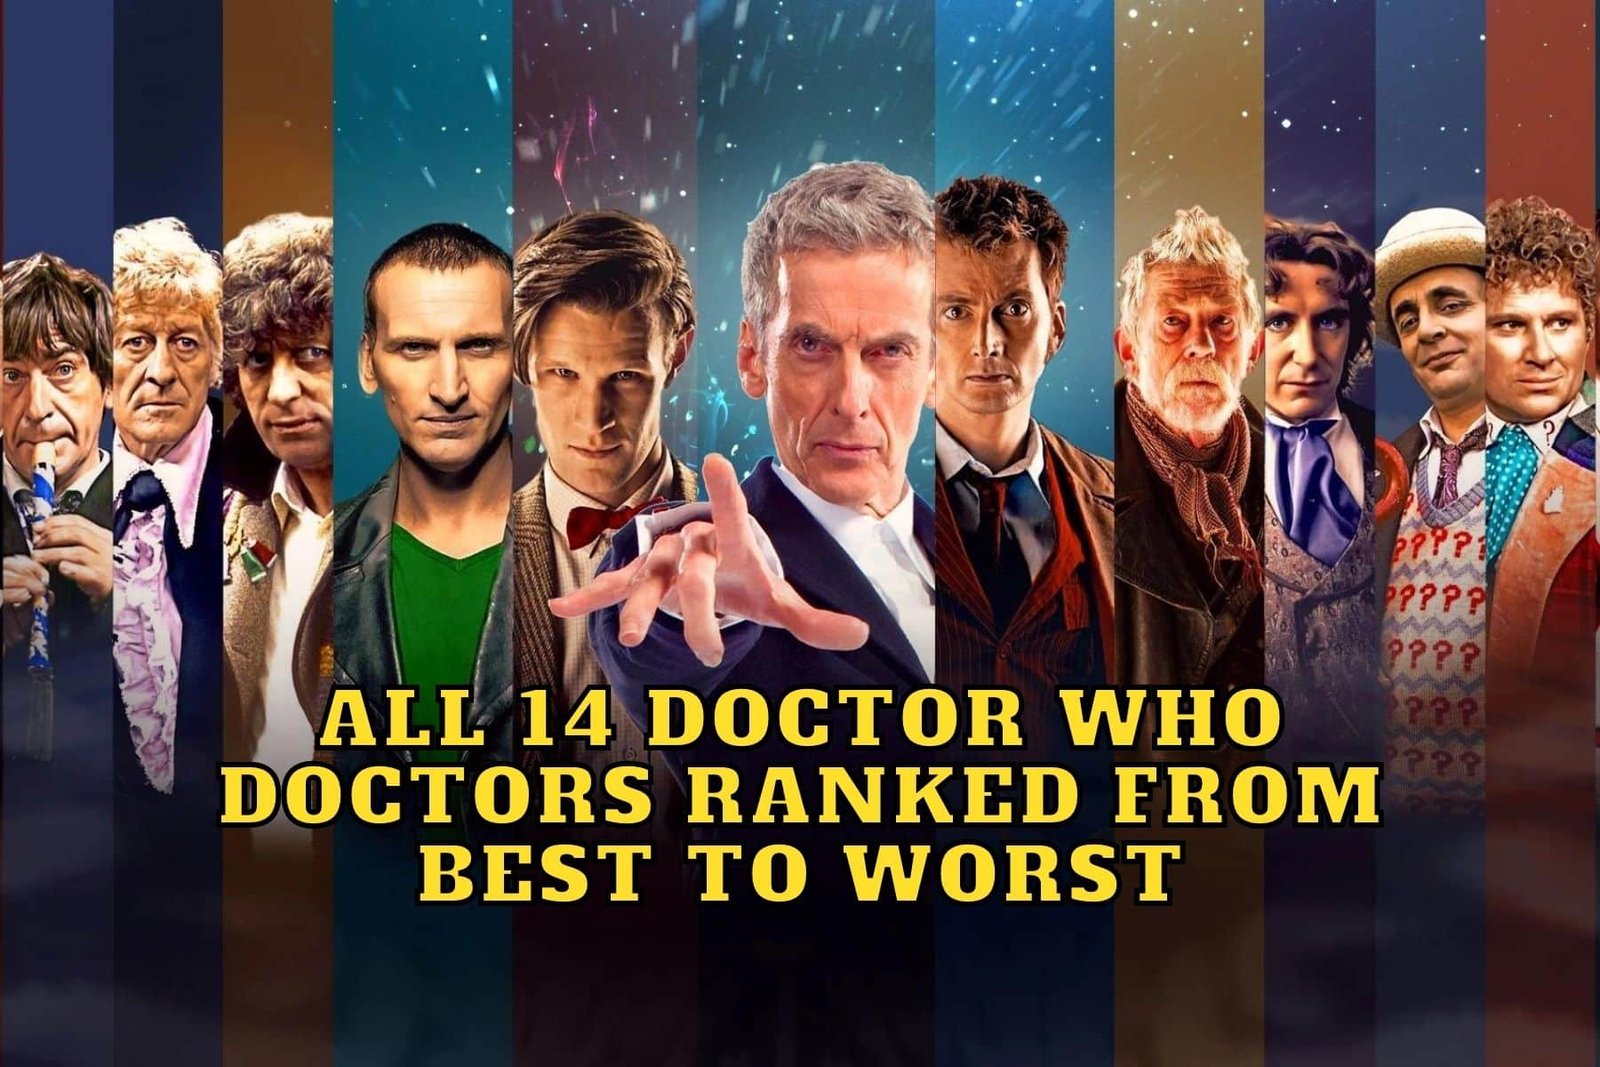 All 14 Doctor Who Doctors Ranked From Best to Worst - Will Ncuti Gatwa be the Best Doctor Ever?